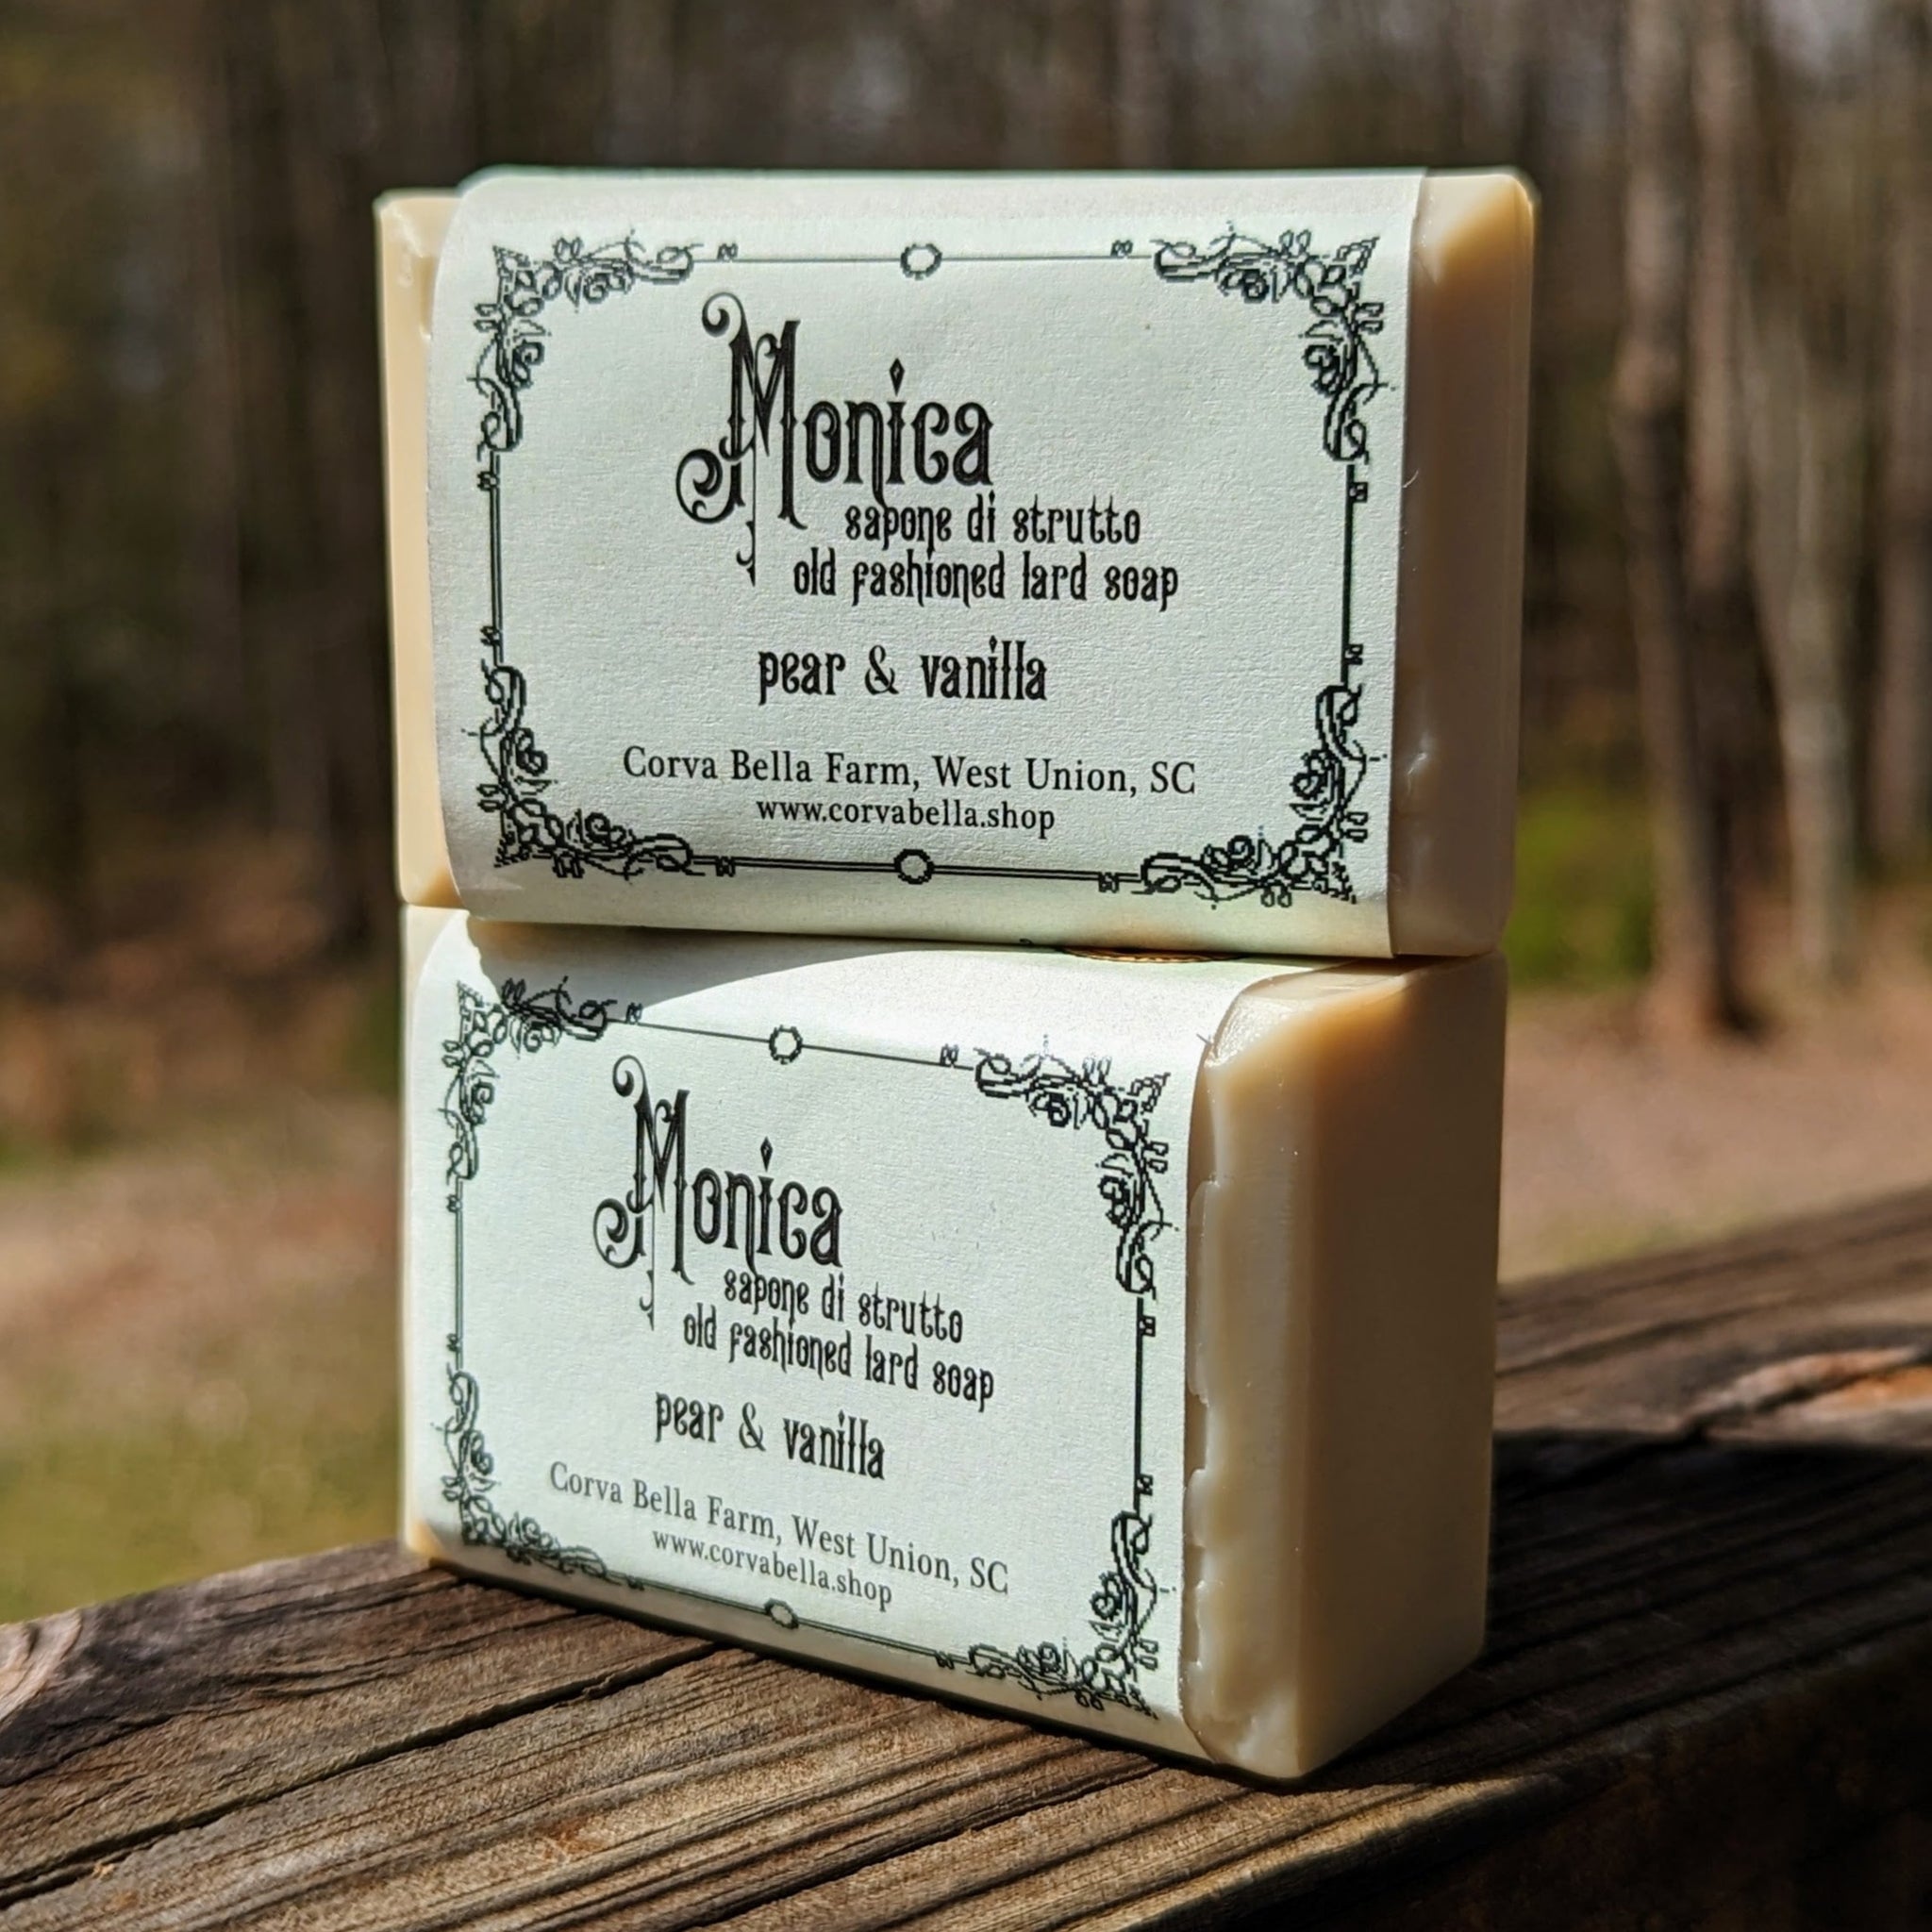 MONICA  lard soap - Pear & Vanilla (ONLY SAMPLES AVAILABLE)